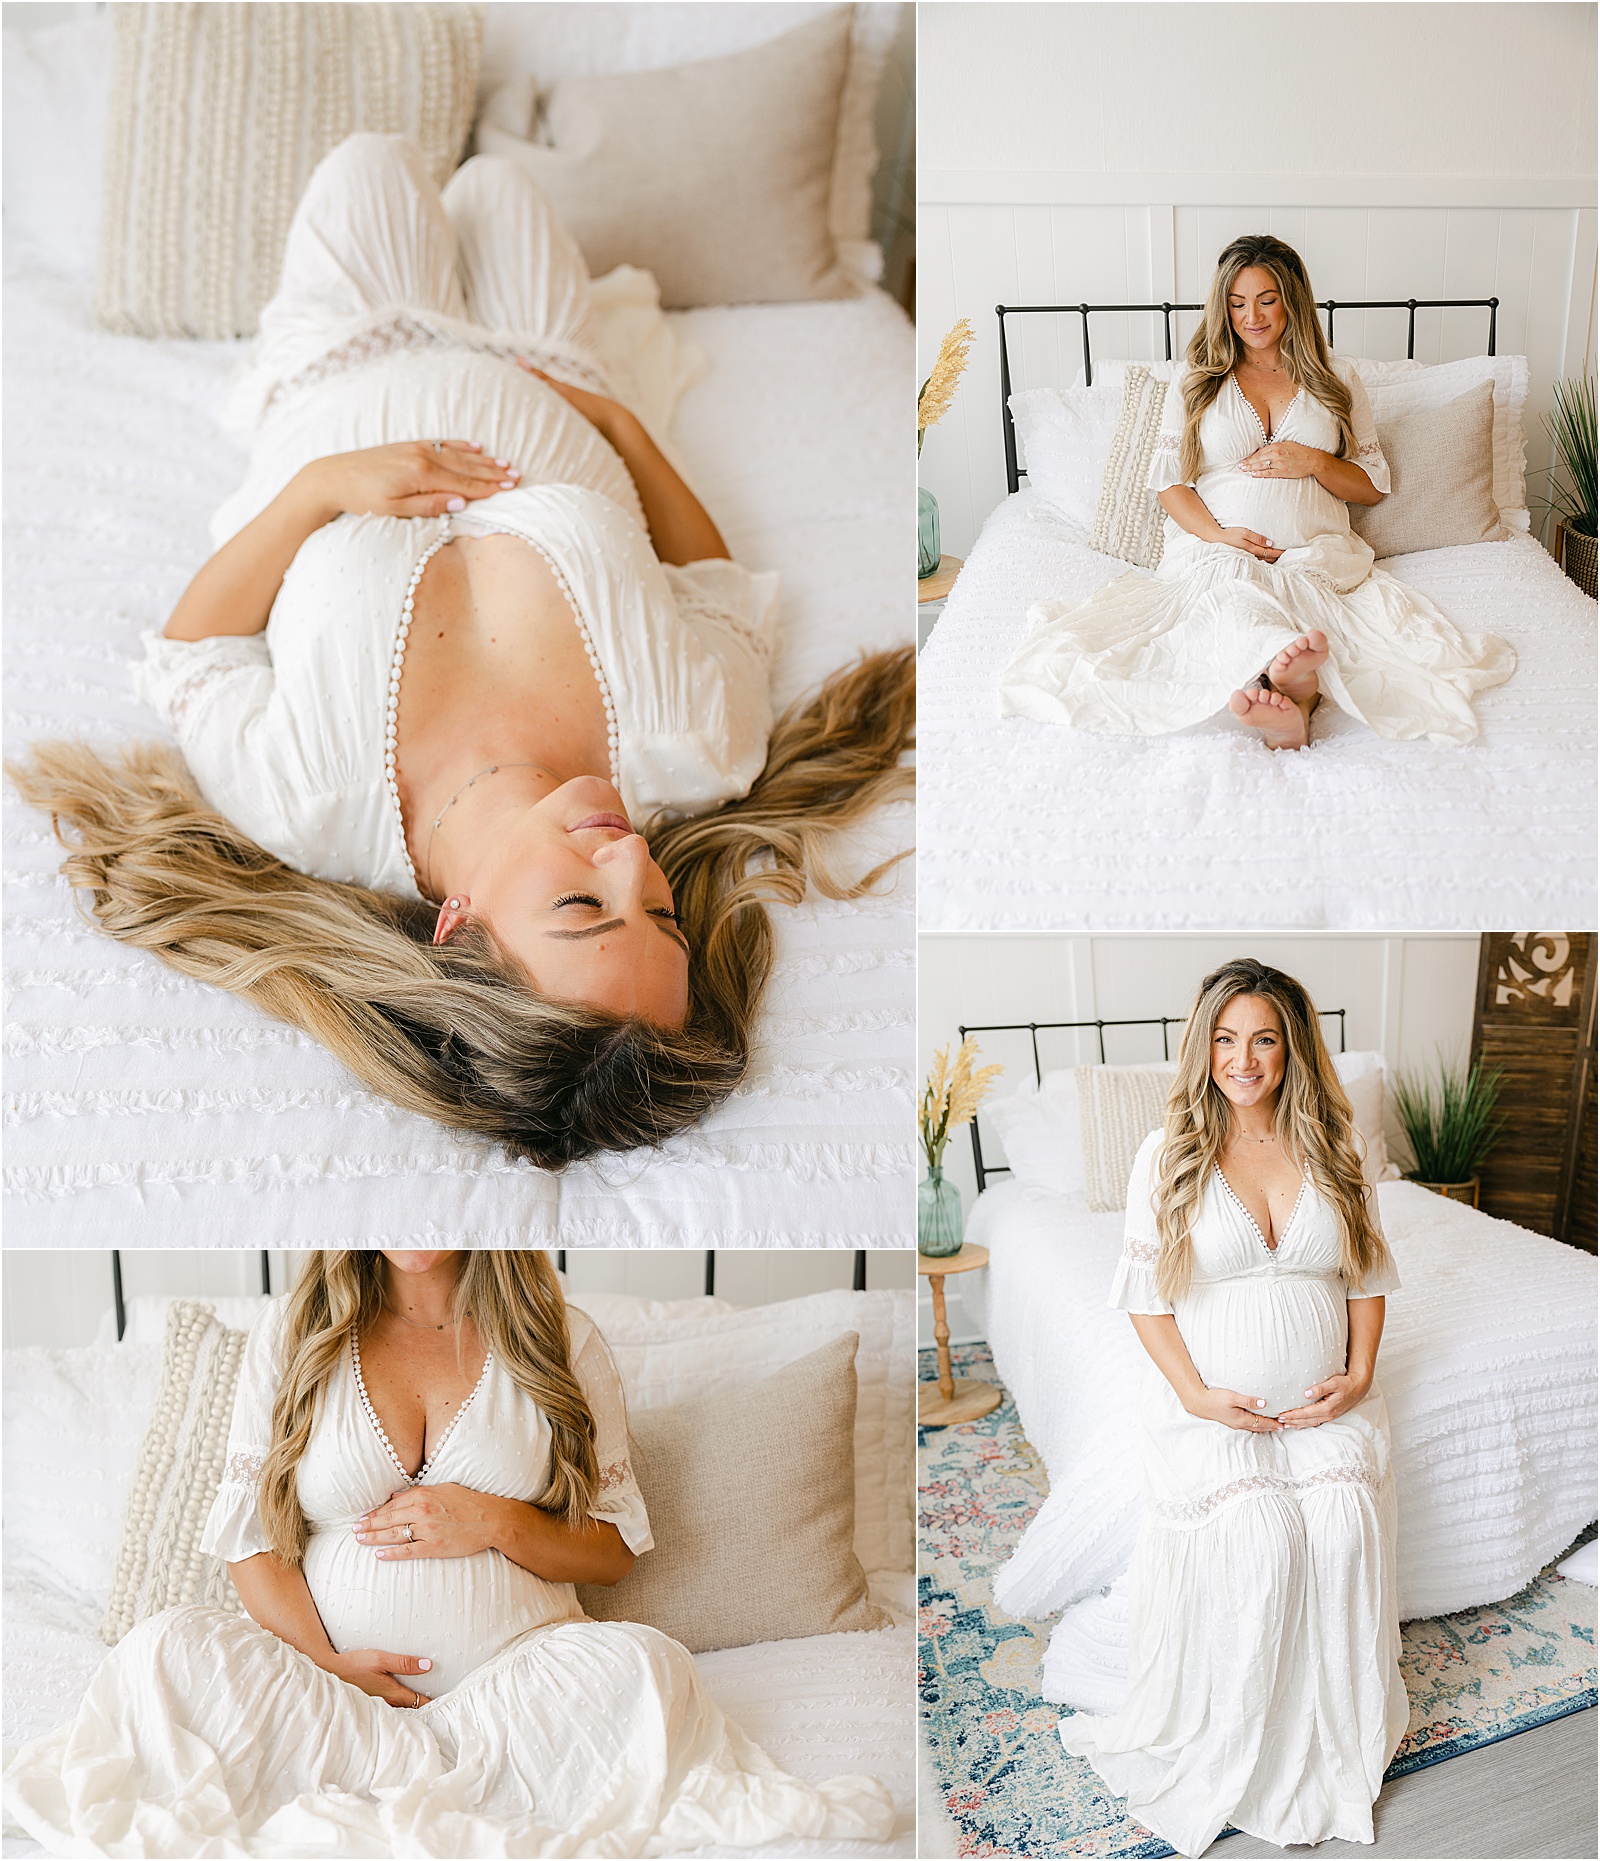 glimpse of amielia's indianapolis maternity session, 32 weeks pregnant posed on white bed with white dress